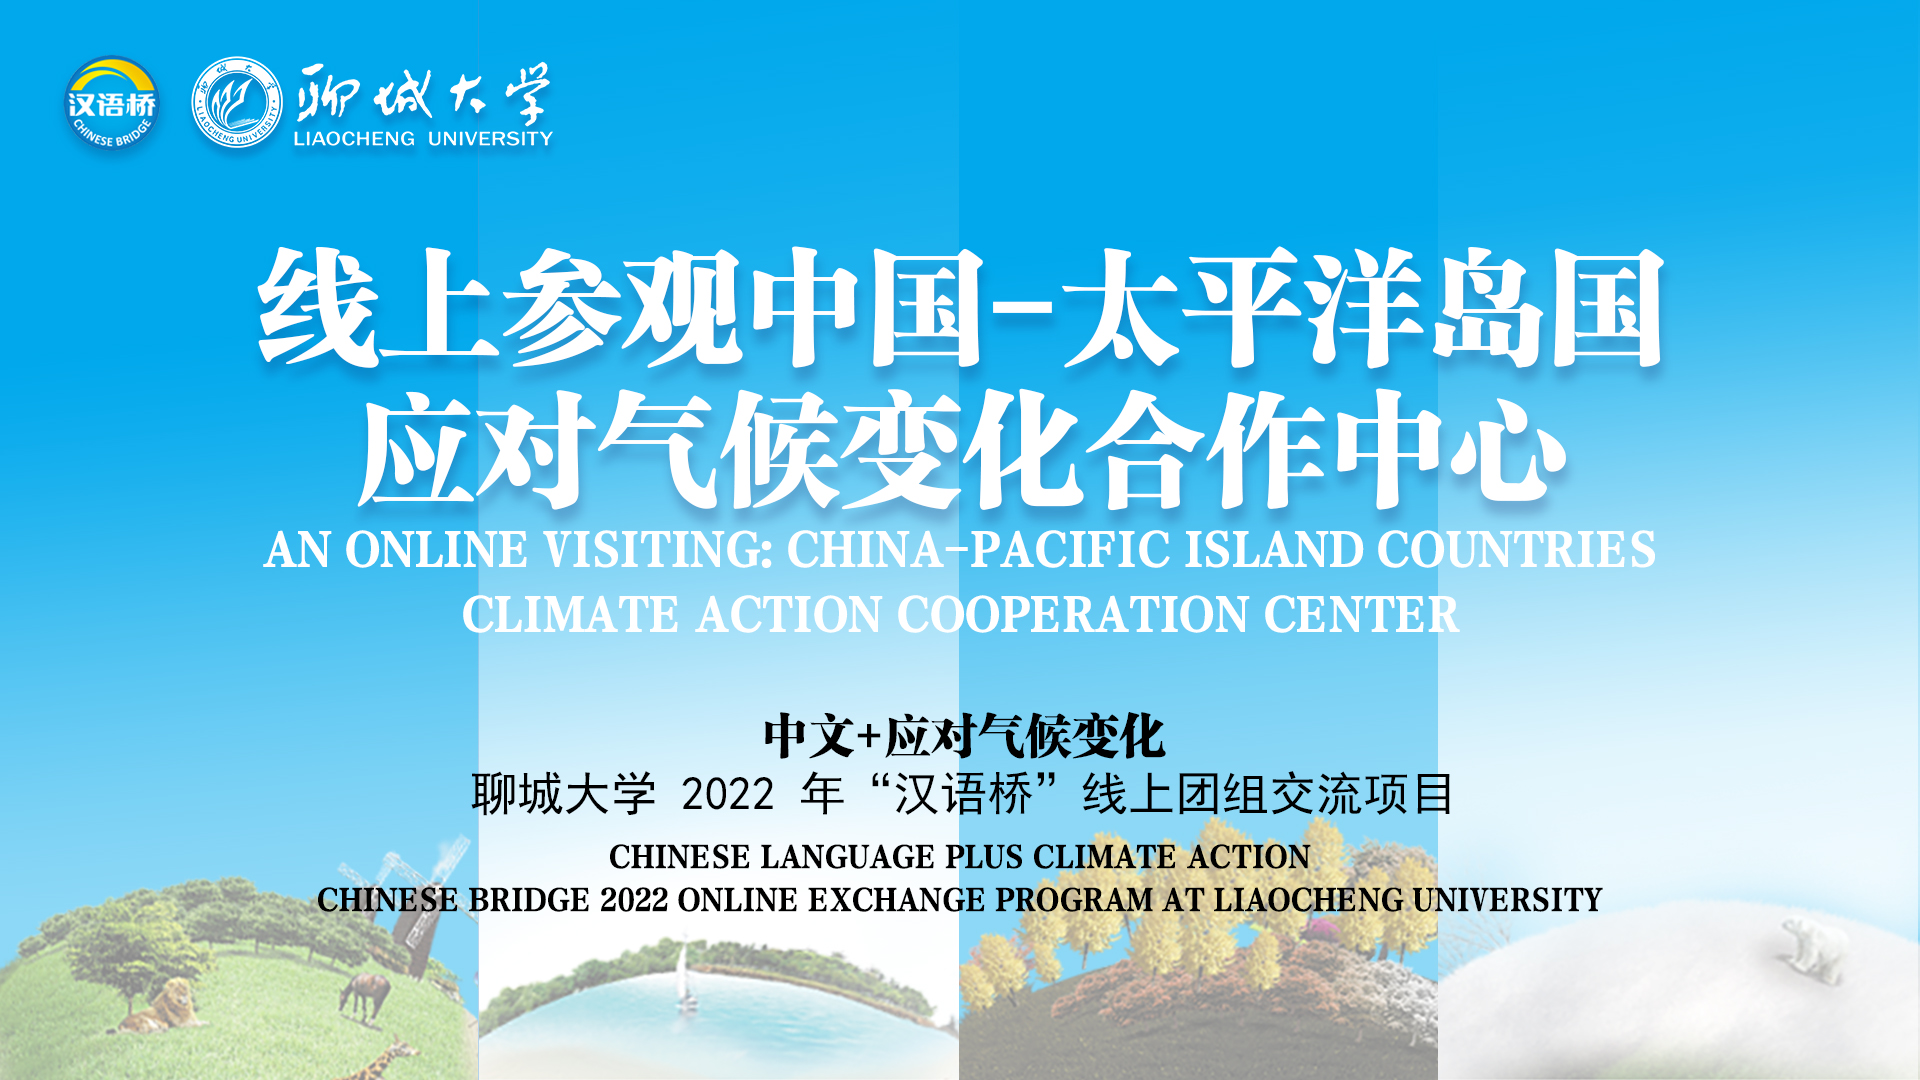 An Online Visiting: China-Pacific Island Countries Climate Action Cooperation Center